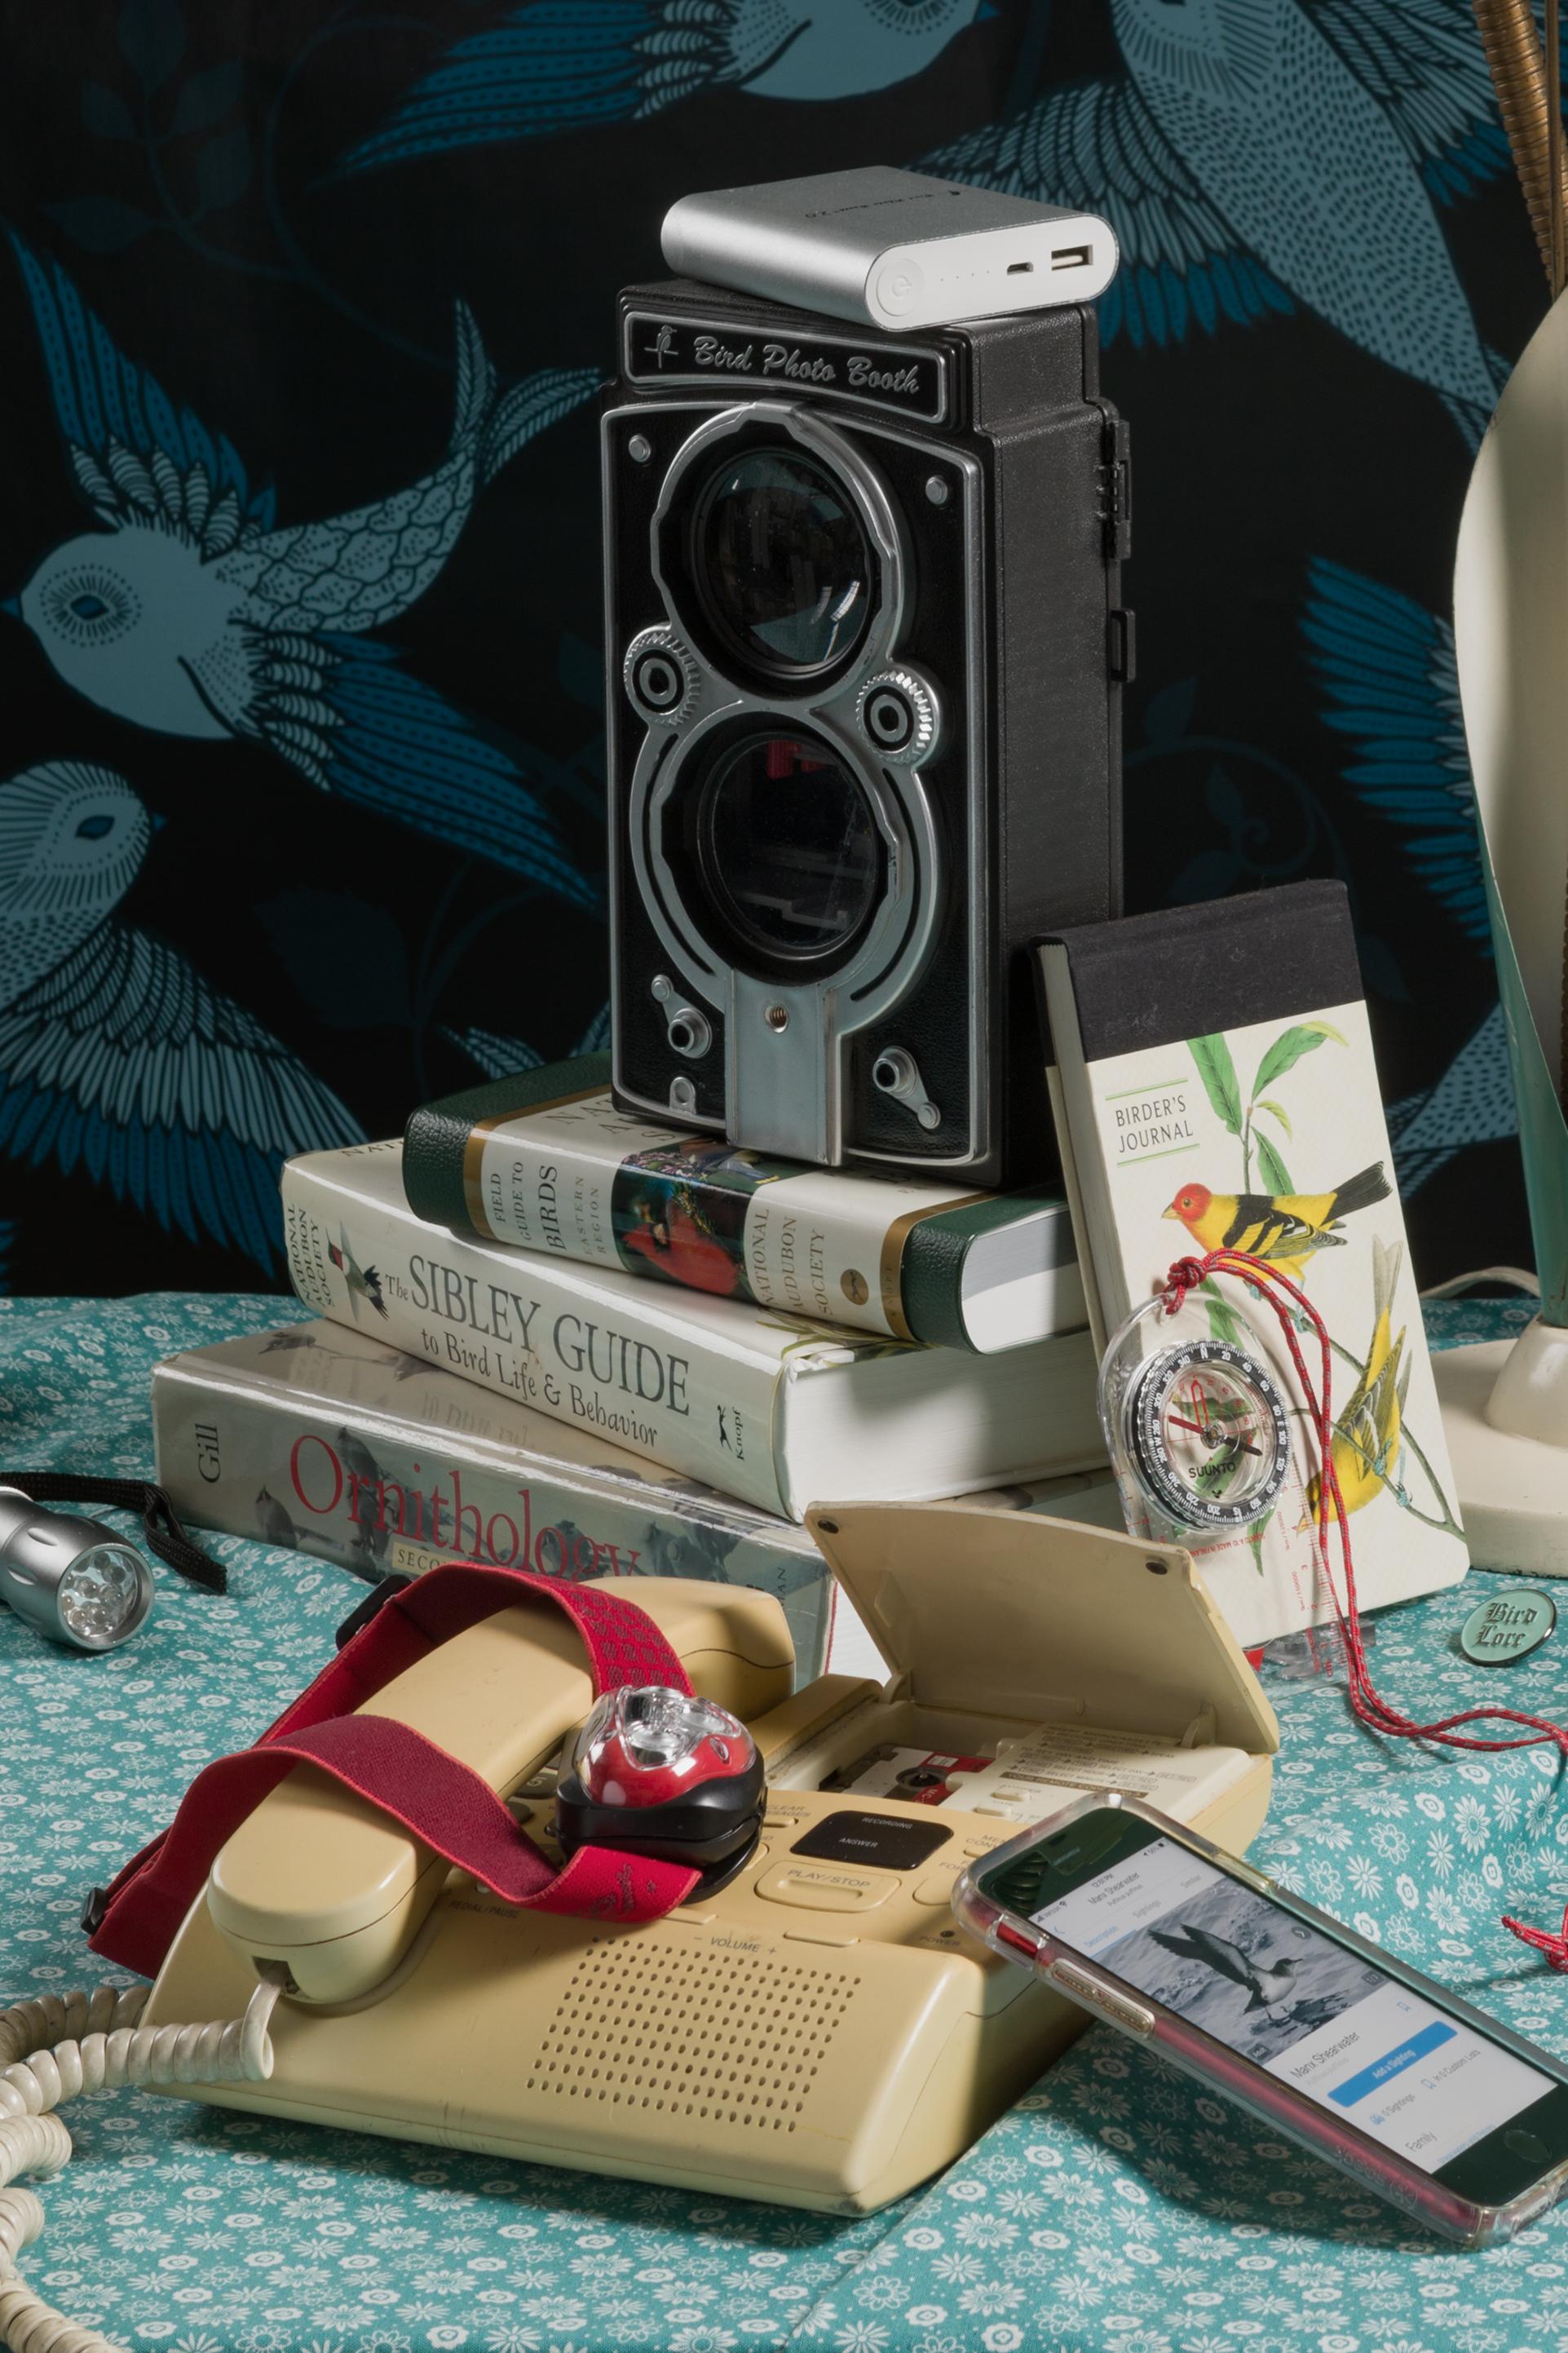 “Still Life with Binoculars” Vintage Tech Photograph about Bird Watching - Contemporary Print by Jeanette May